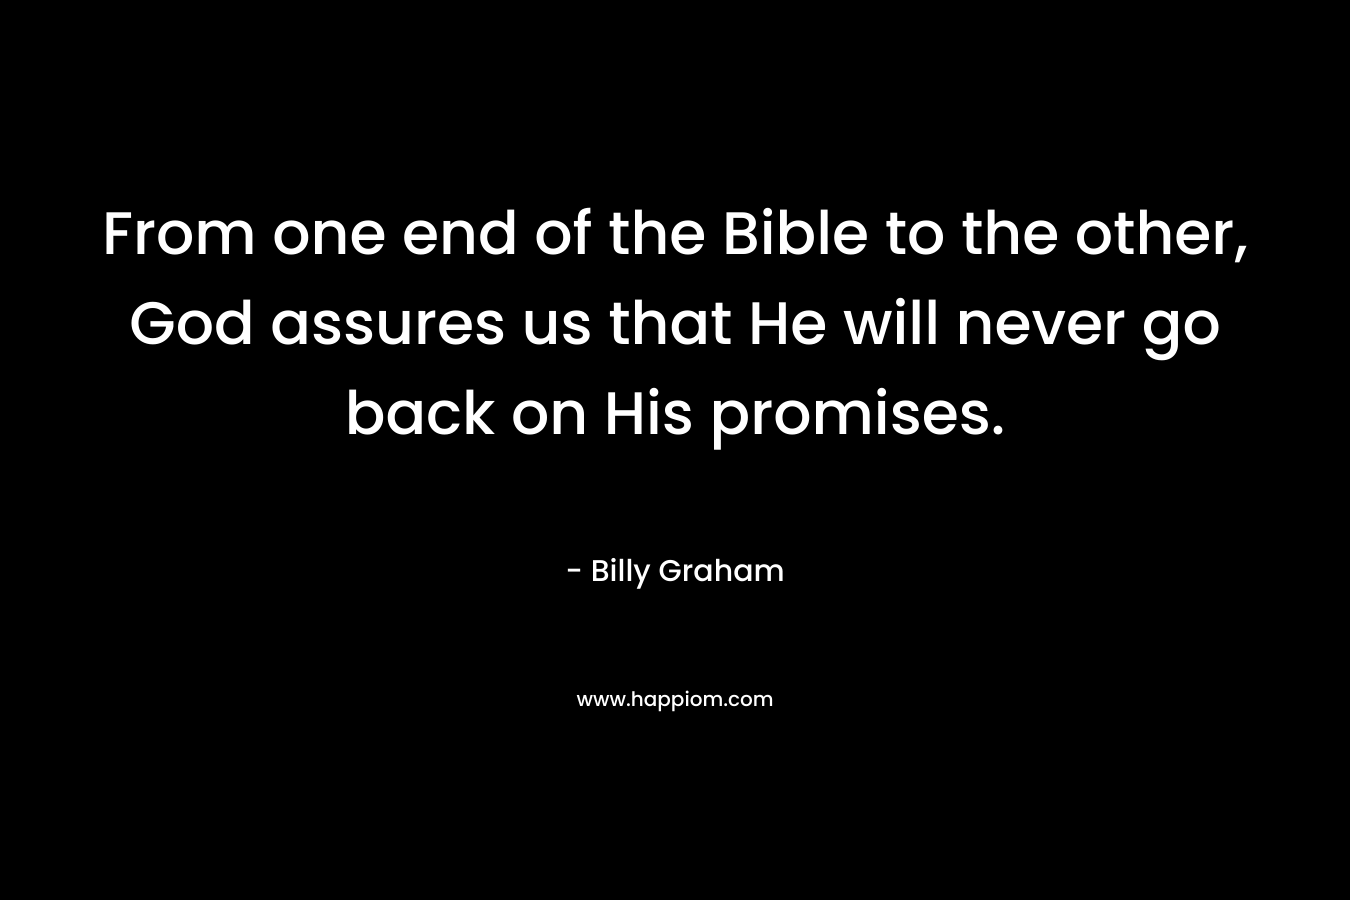 From one end of the Bible to the other, God assures us that He will never go back on His promises.